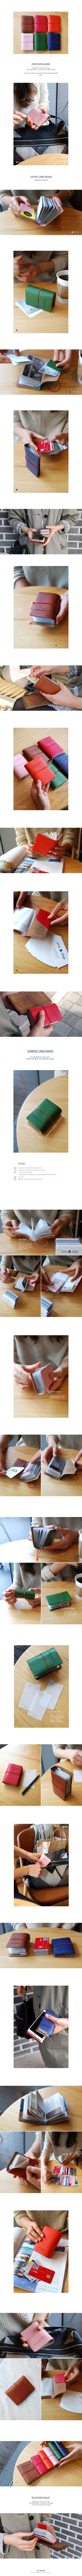 PLEPIC - Extra Card Book - Credit Card Holder